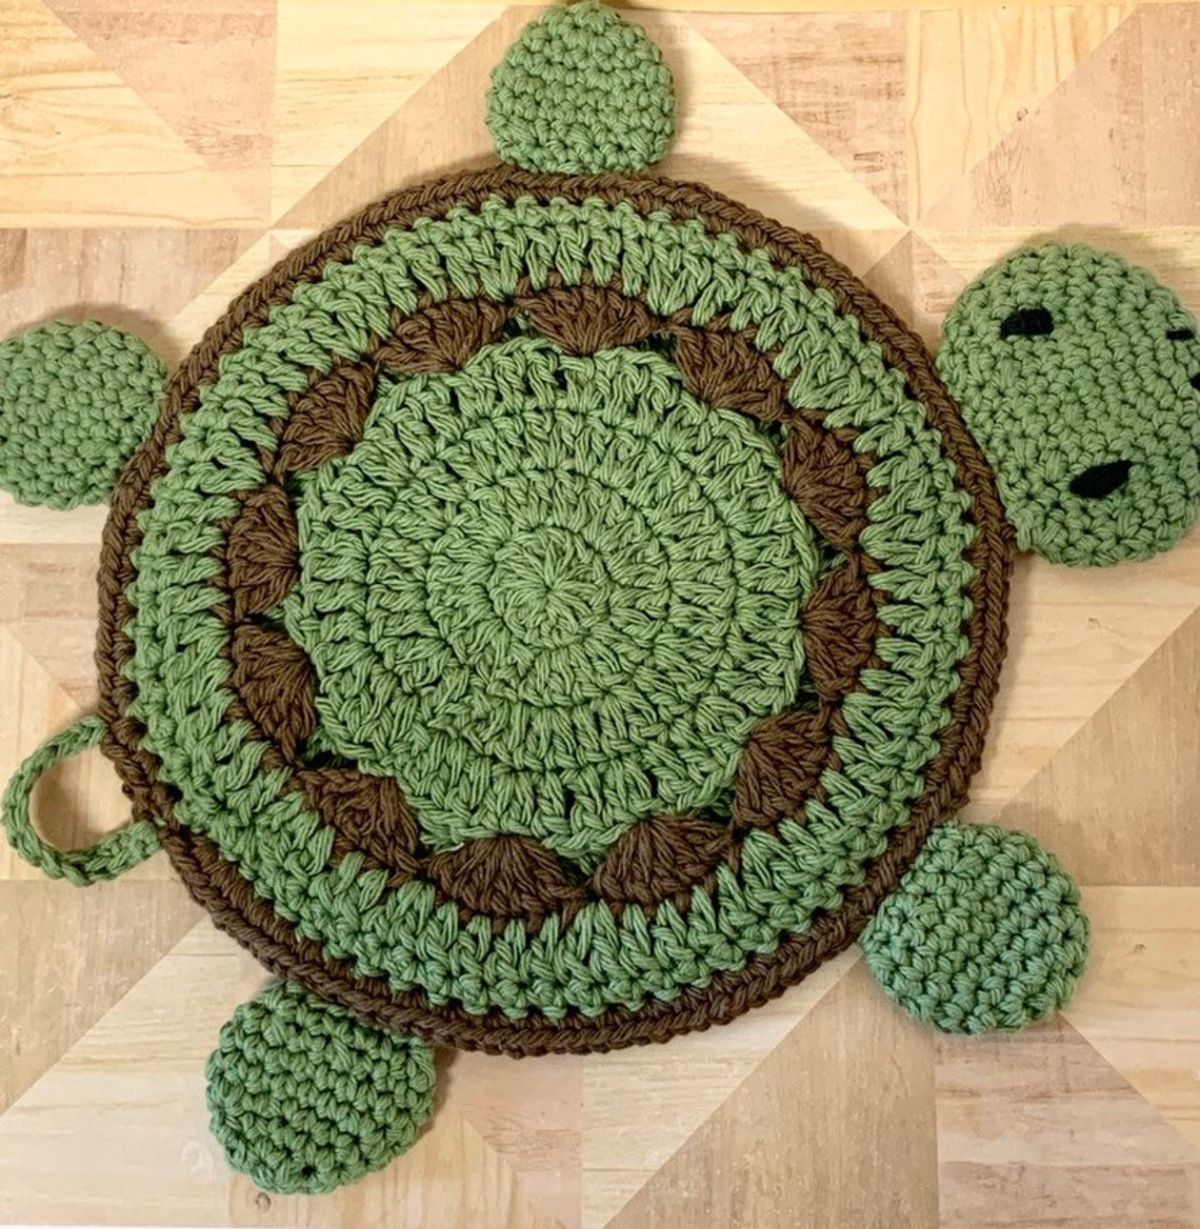 Large green and brown turtle shaped crochet pot holder on a wooden countertop.